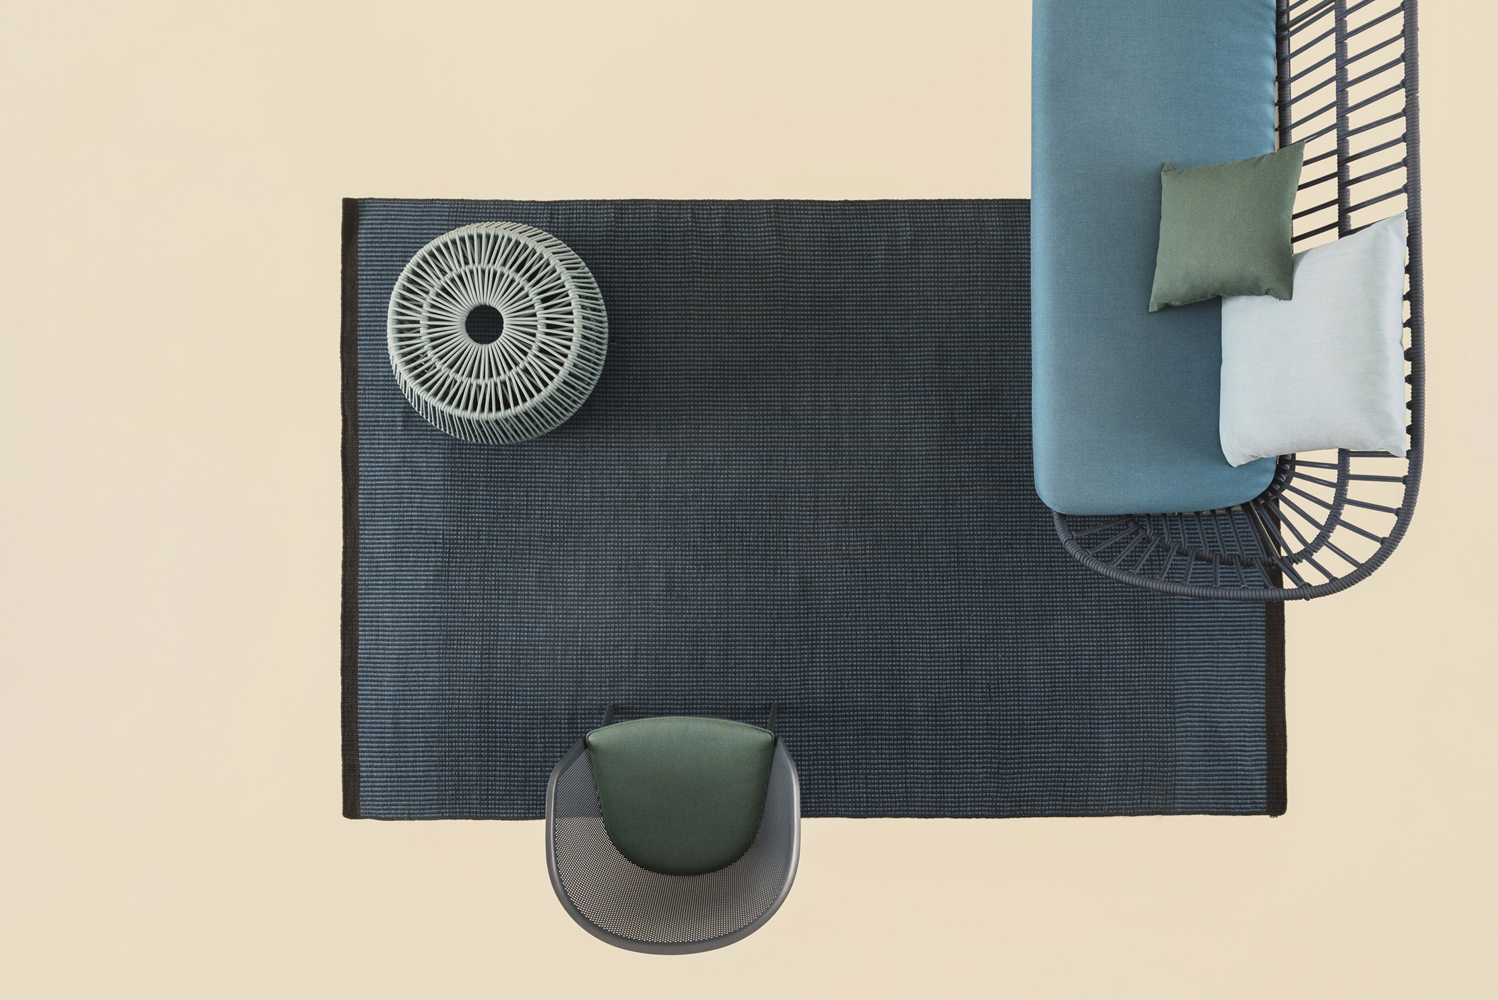 Kettal launched the Geometrics collection 